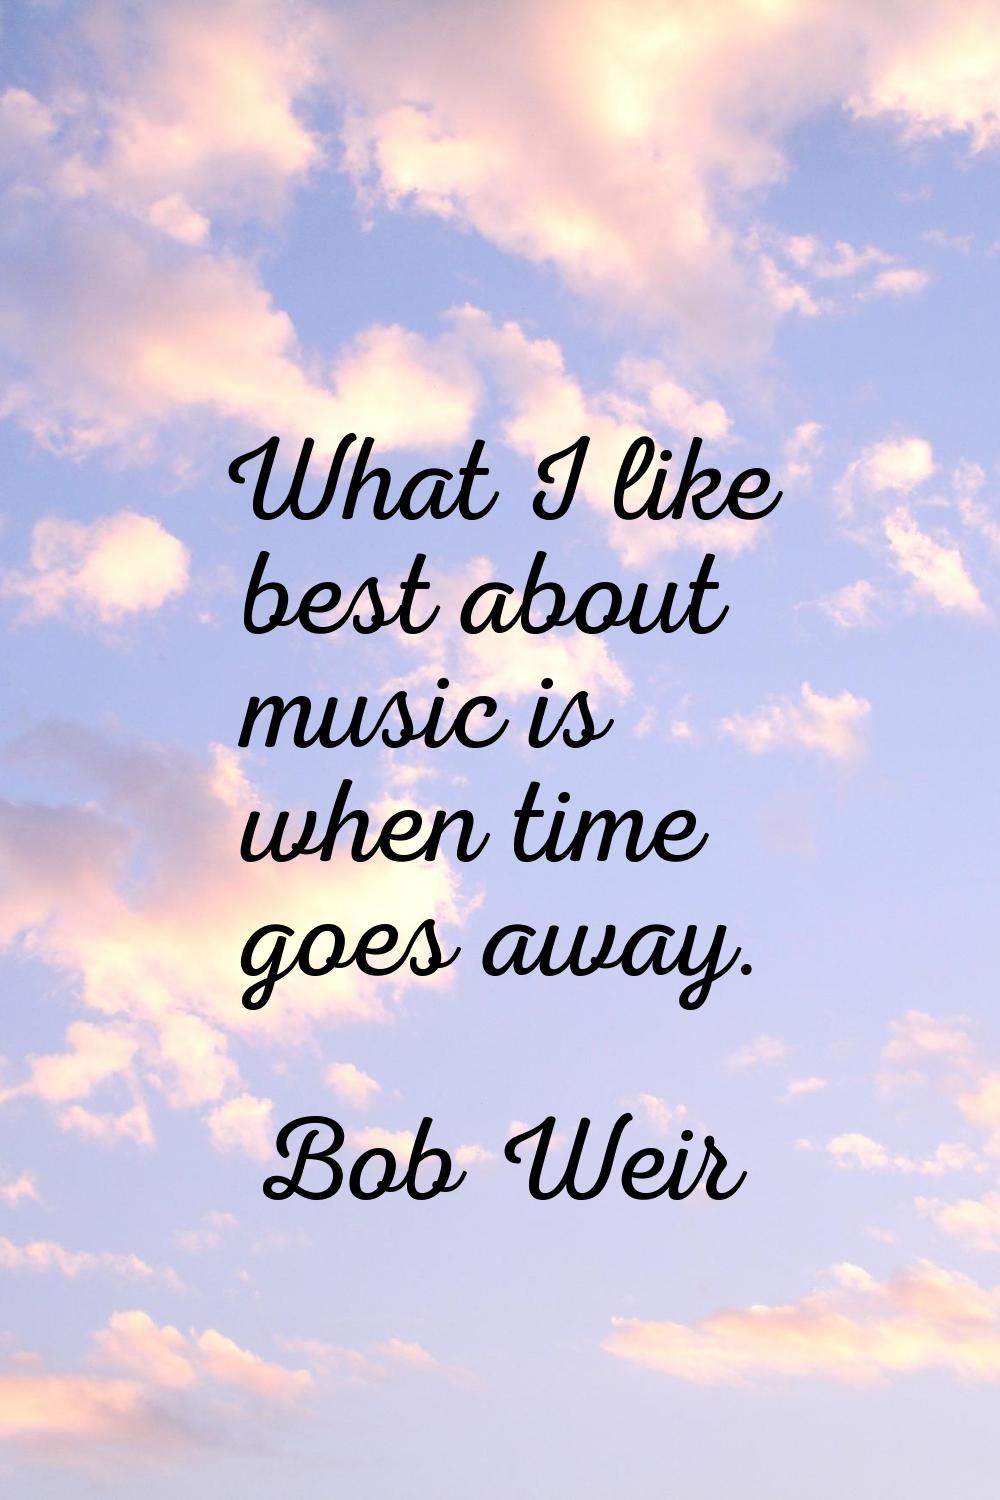 What I like best about music is when time goes away.